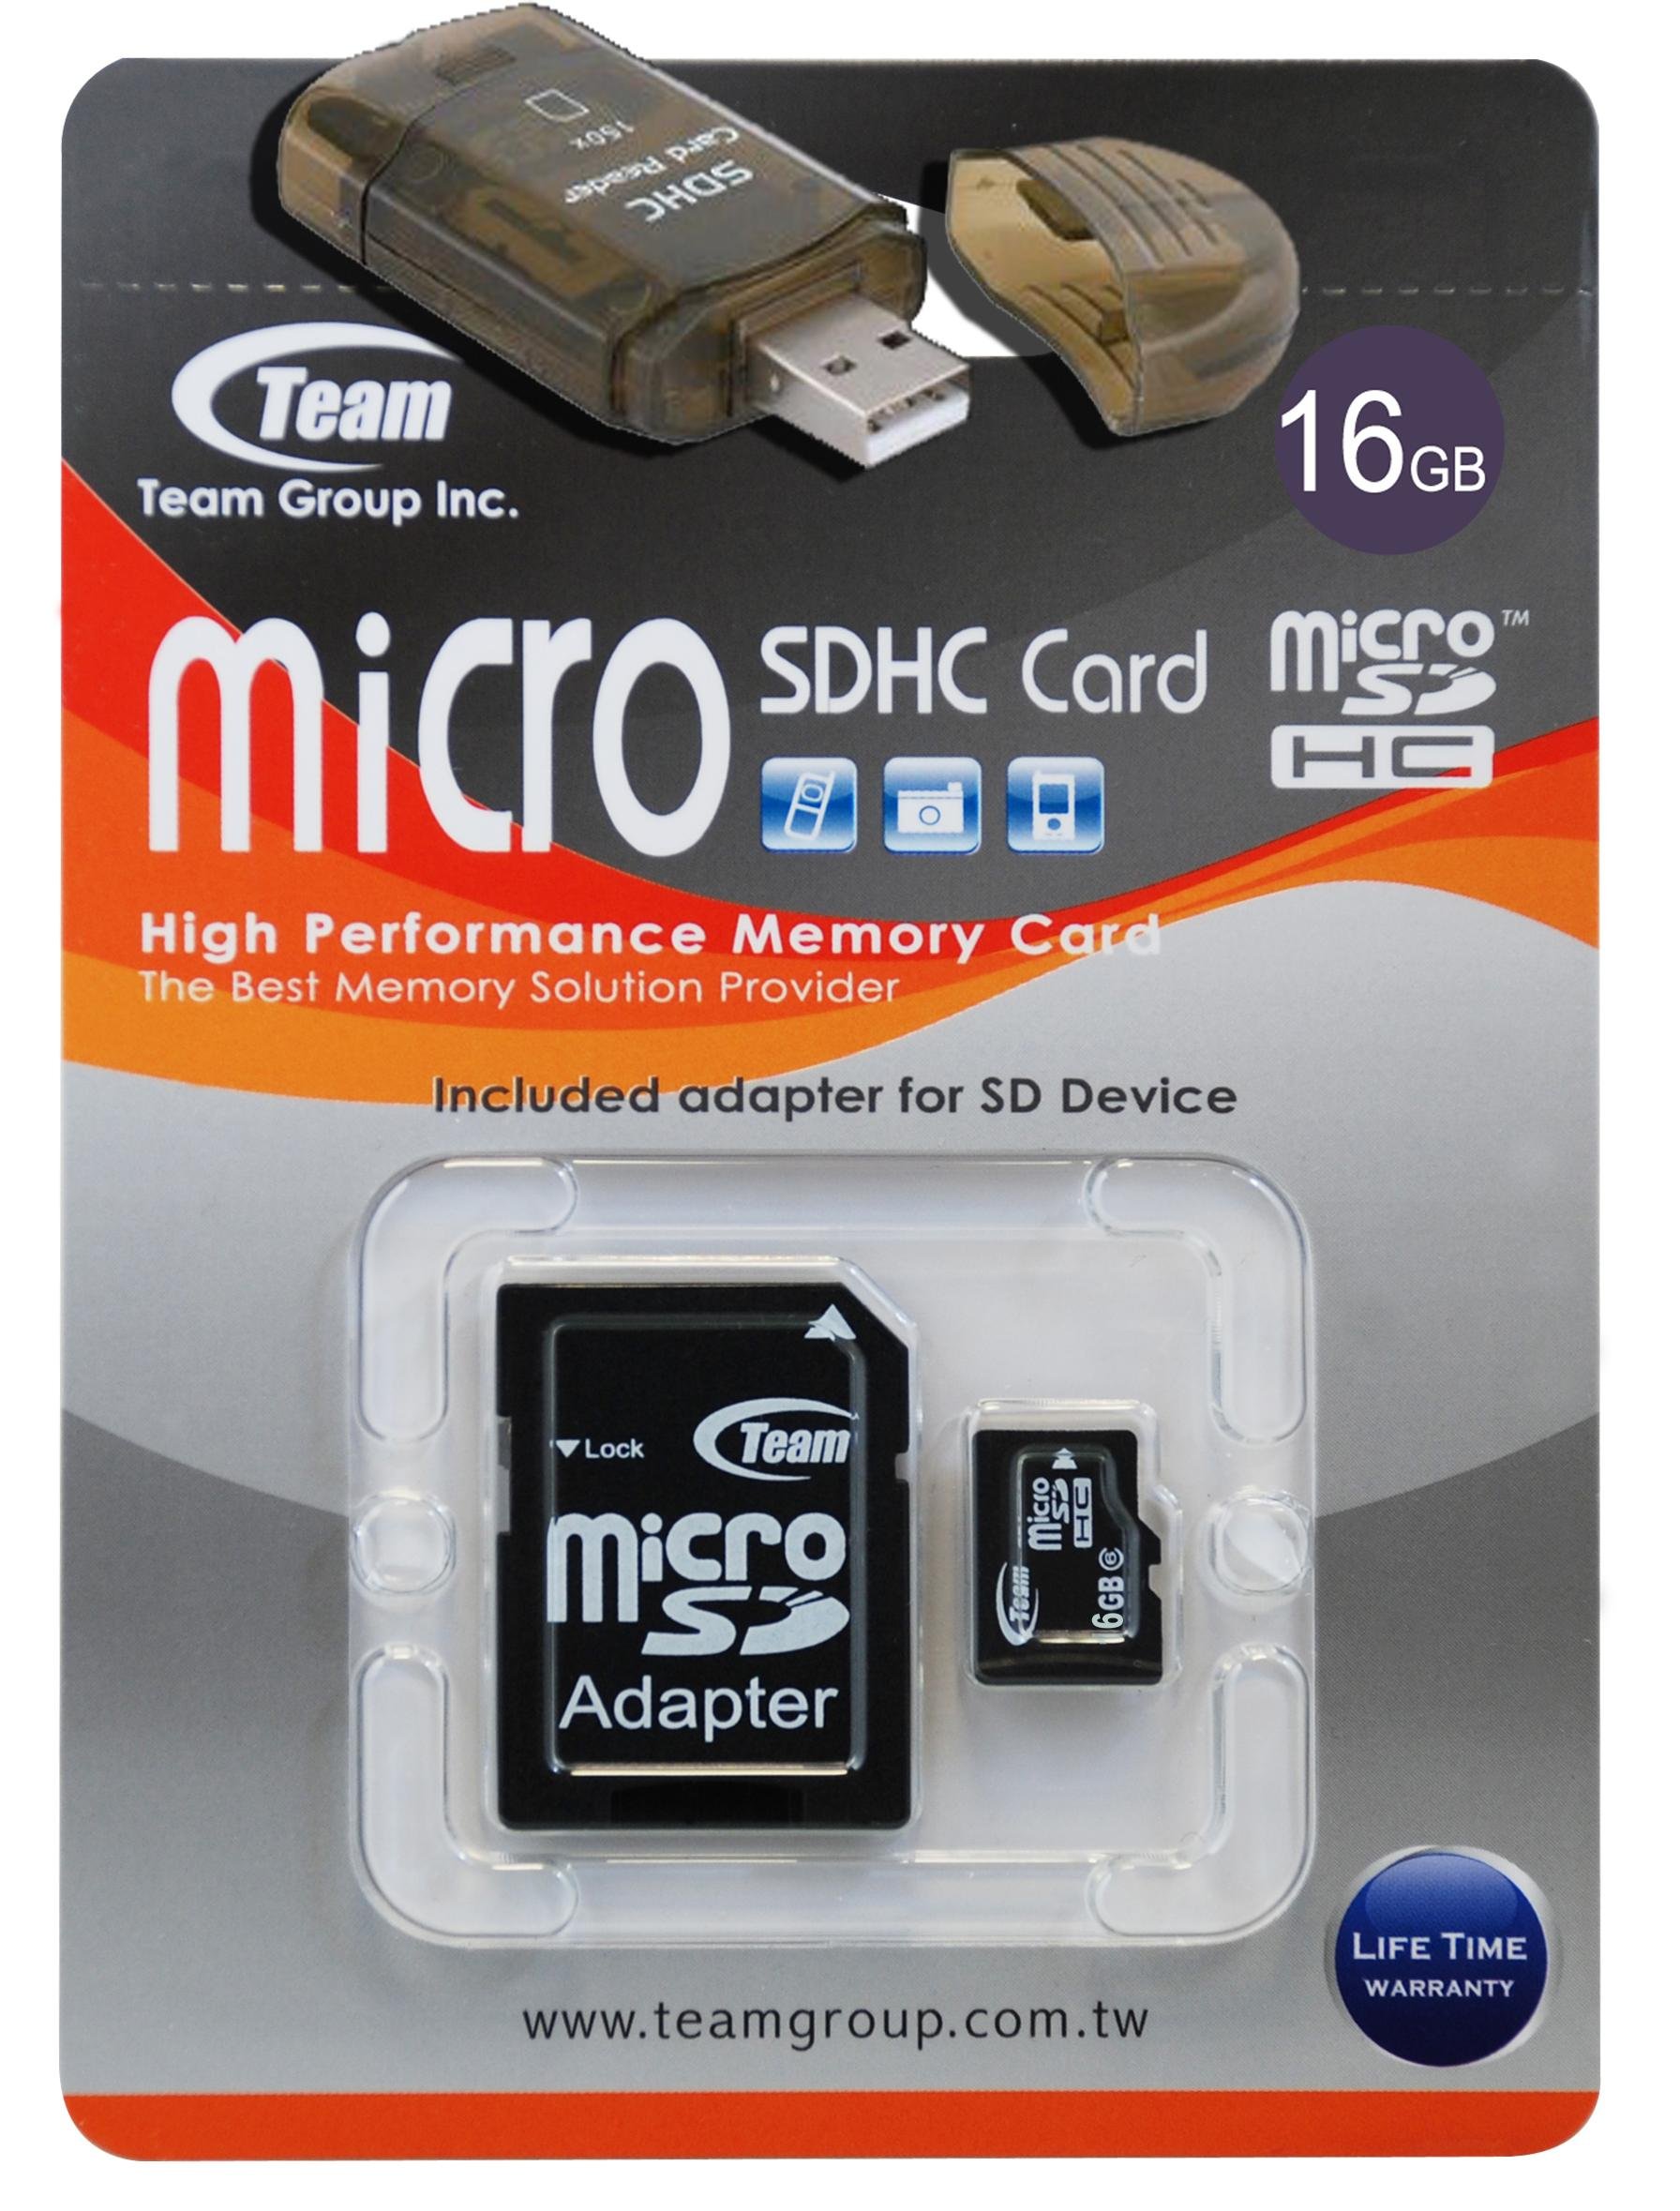 16GB Turbo Speed Class 6 MicroSDHC Memory Card For SAMSUNG SGH-I637 SGH-I900. High Speed Card Comes with a free SD and USB Ad